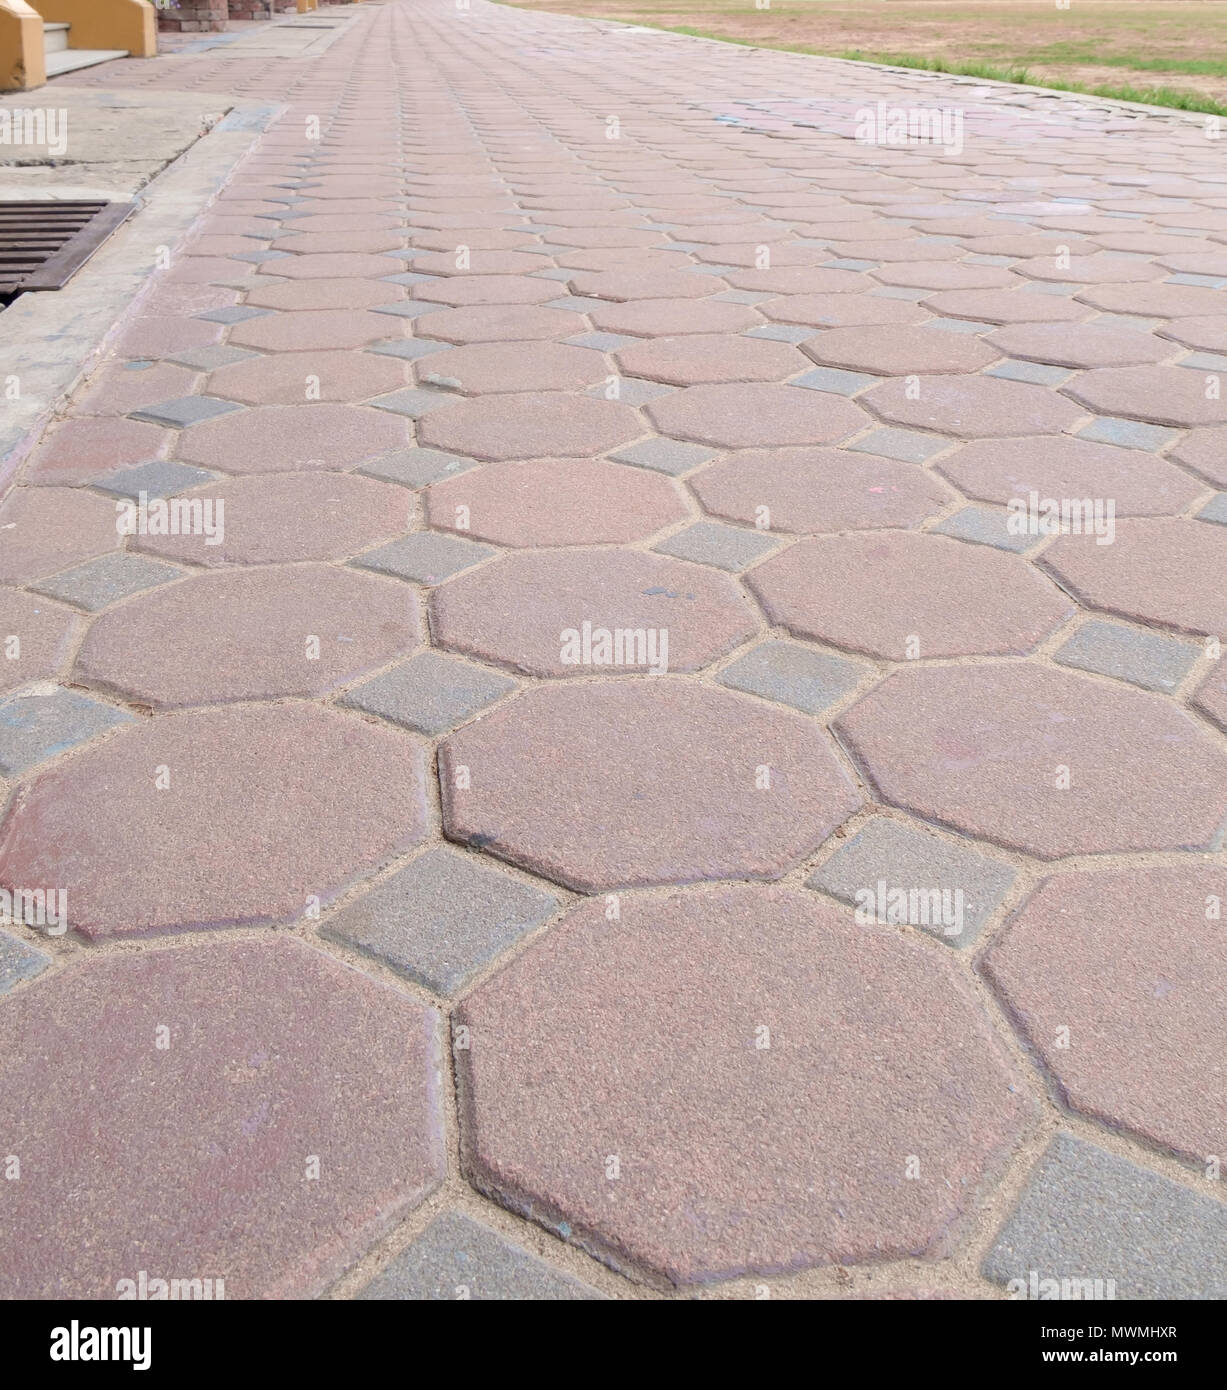 Empty pathway paved with stone block. Stock Photo